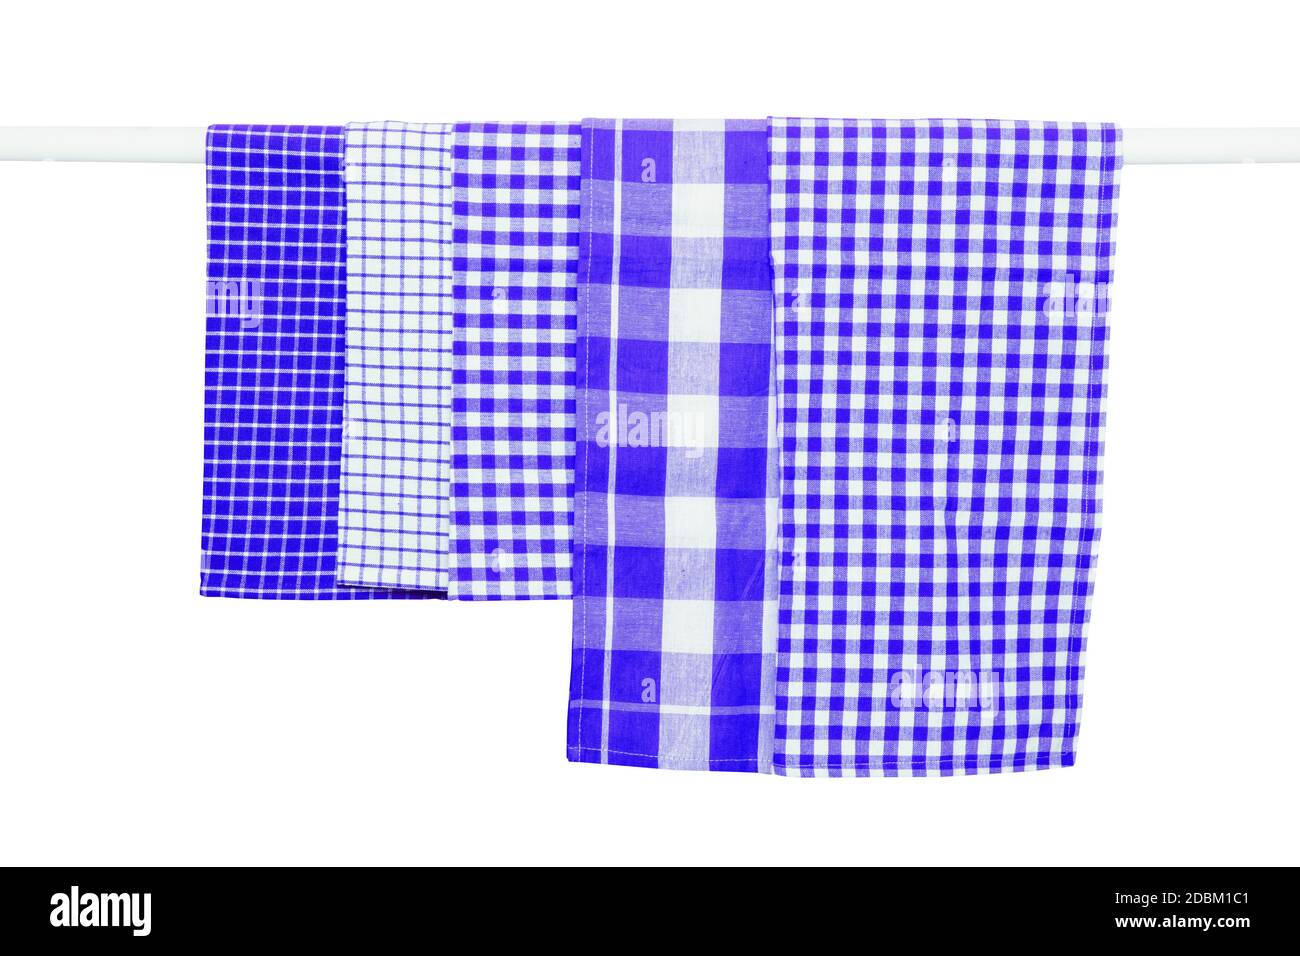 https://c8.alamy.com/comp/2DBM1C1/hanging-towels-isolated-closeup-of-various-blue-checkered-kitchen-towels-hang-on-a-clothes-rail-isolated-on-a-white-background-2DBM1C1.jpg